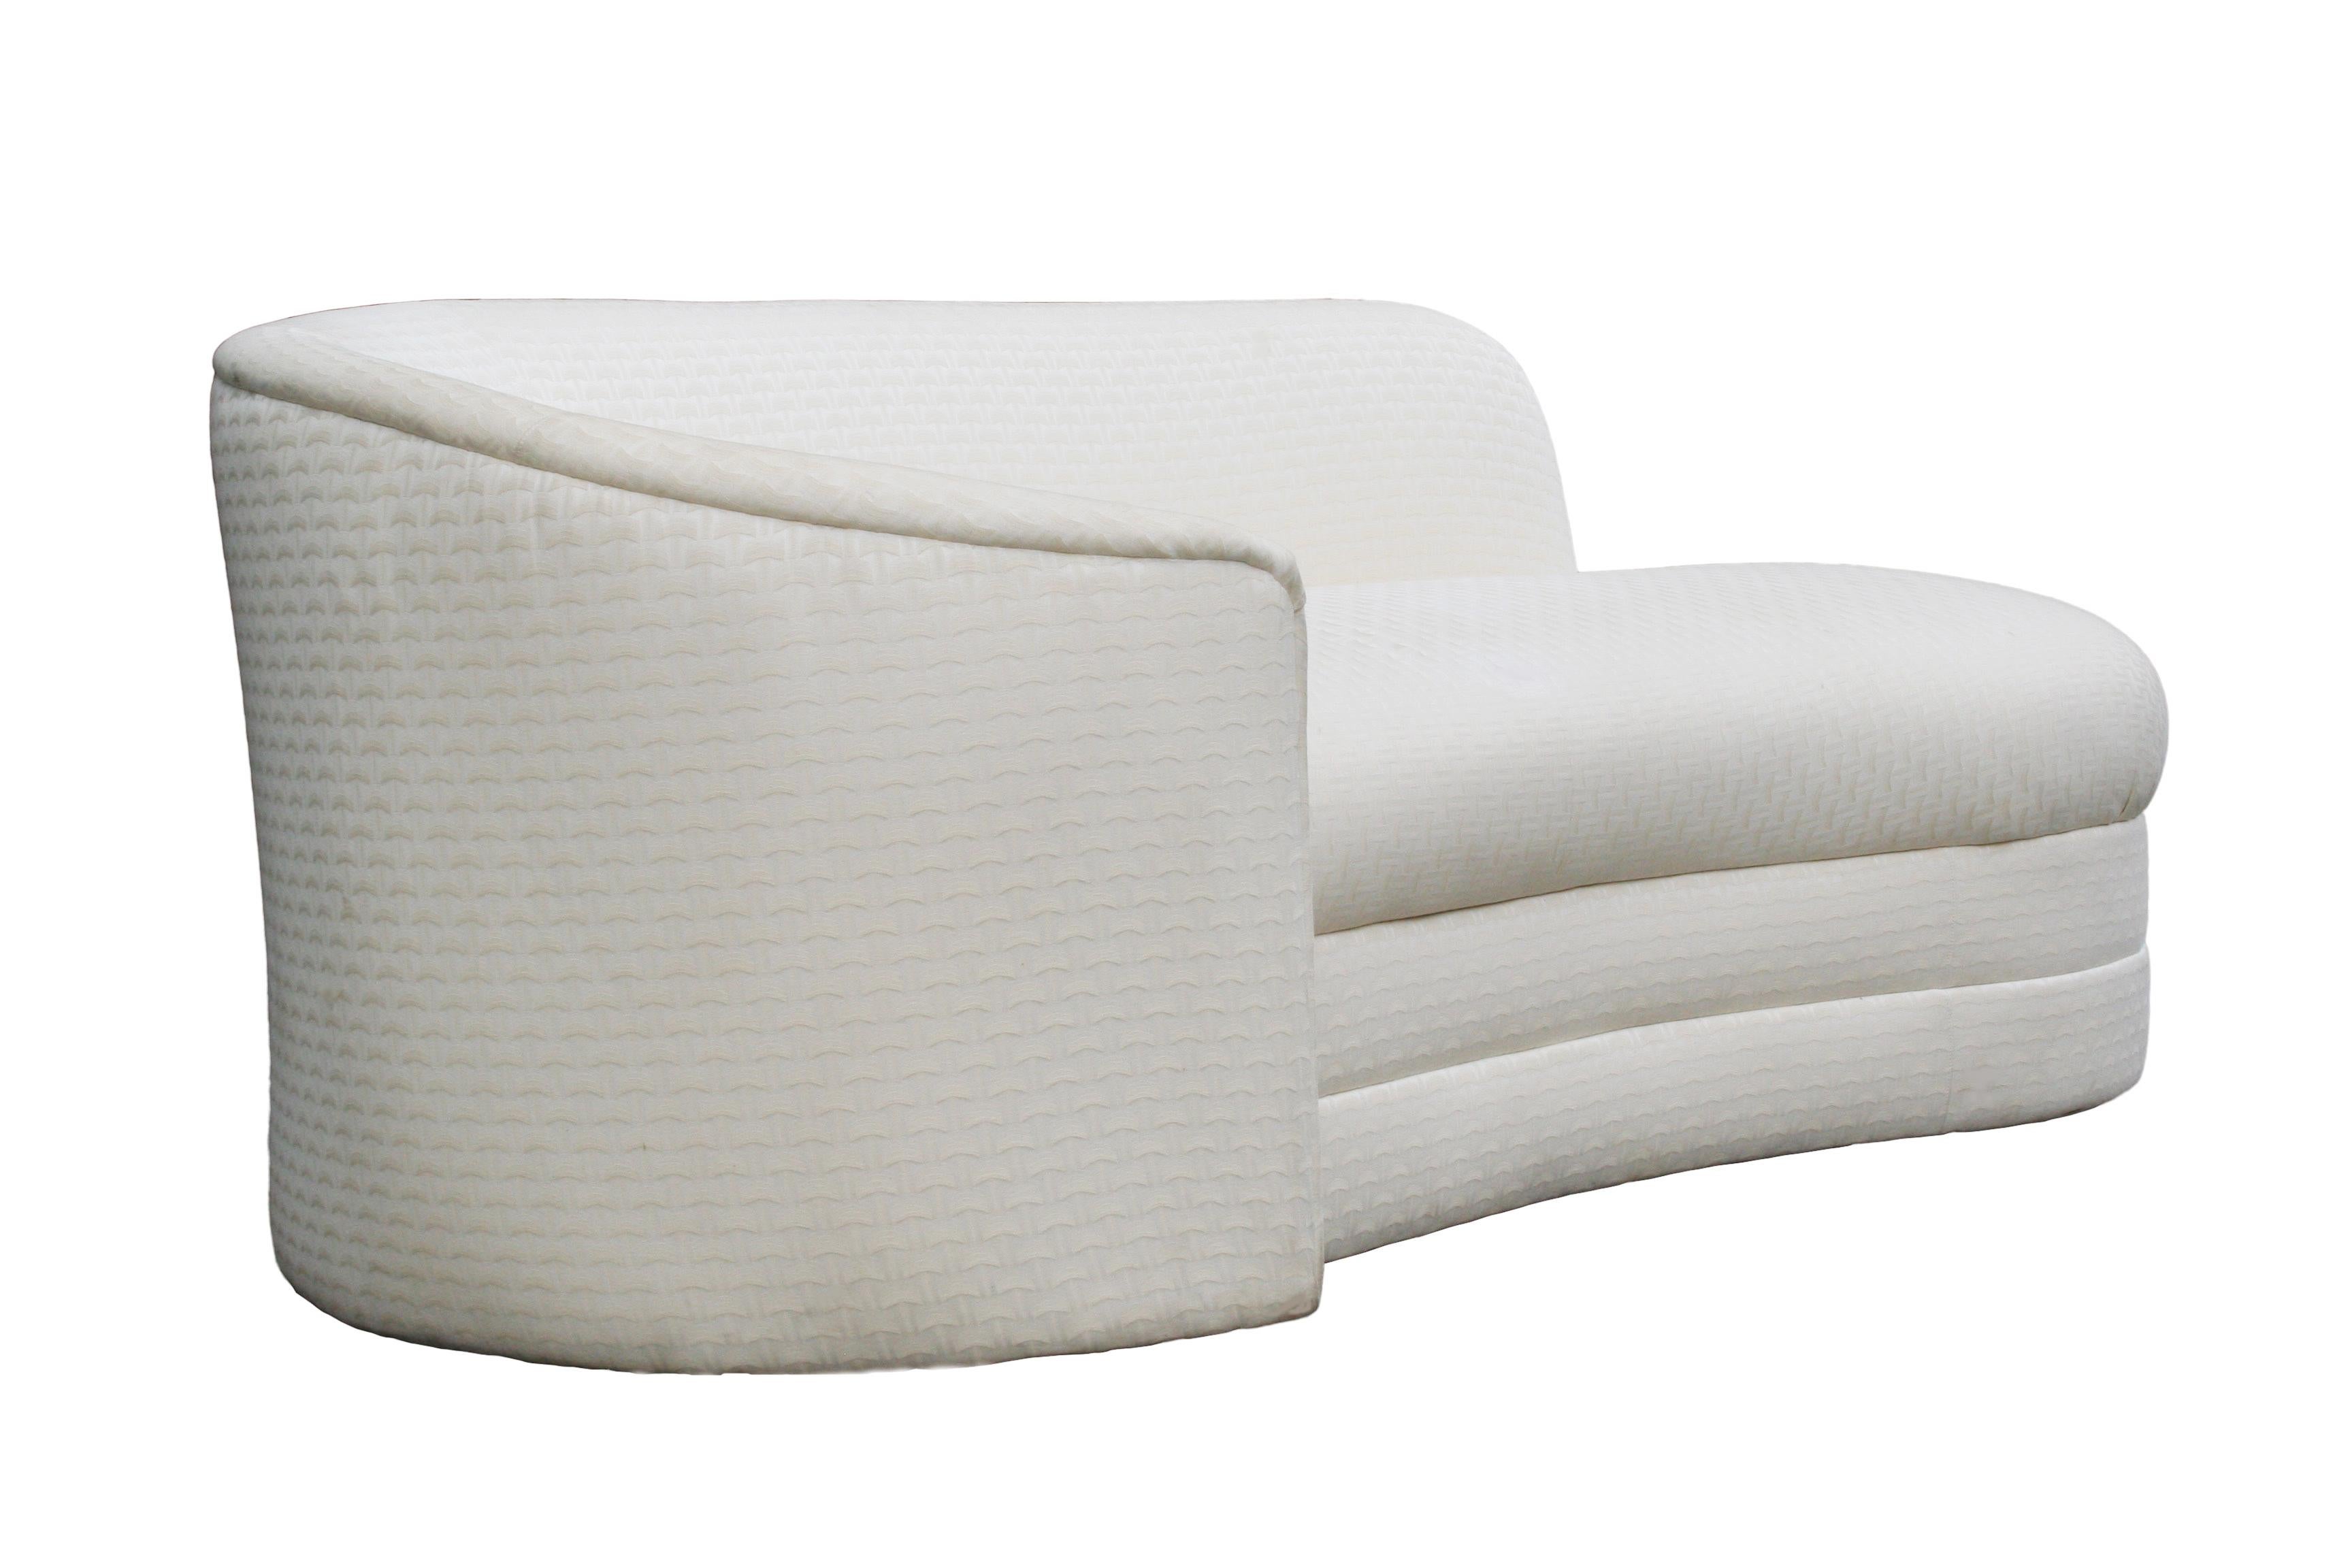 Late 20th Century Mid-Century Modern Chaise Lounge Sofa in White with Art Deco Form